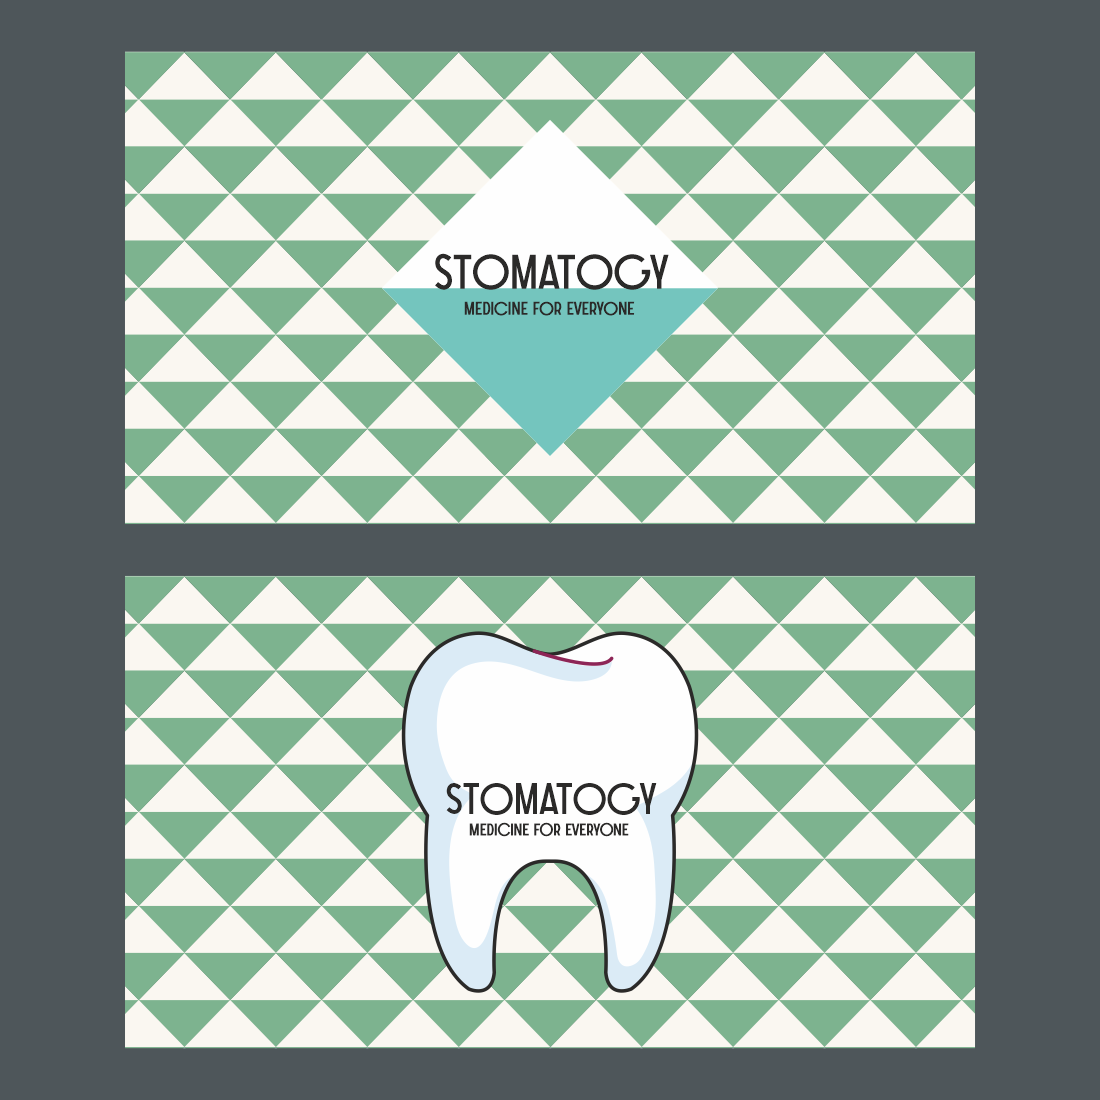 Stomatogy shaped business card preview image.